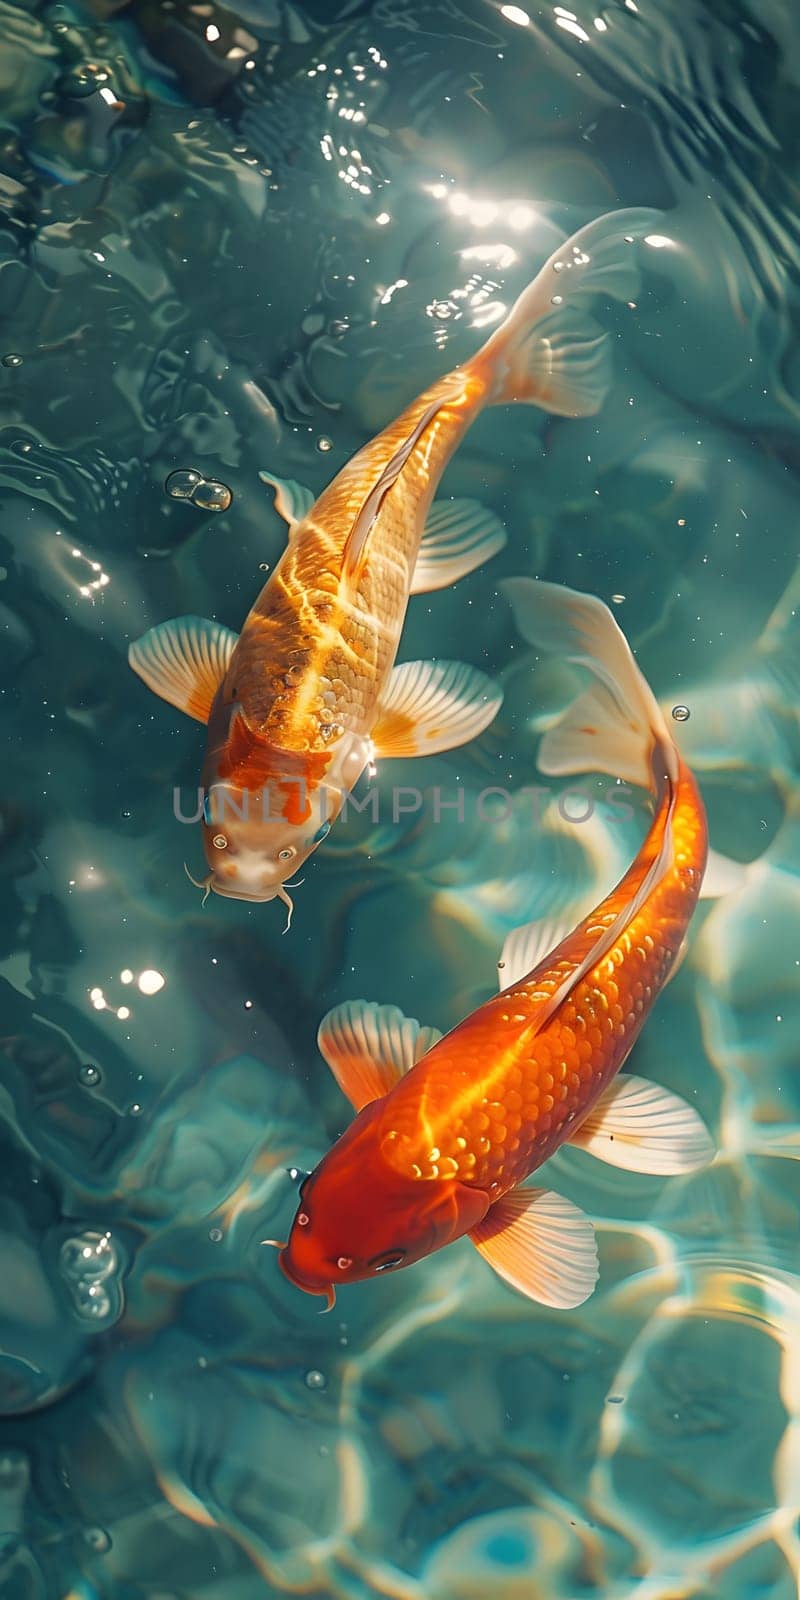 Two goldfish with shiny scales and graceful fins gracefully swim in the clear liquid of a tranquil pond, swirling through the underwater world